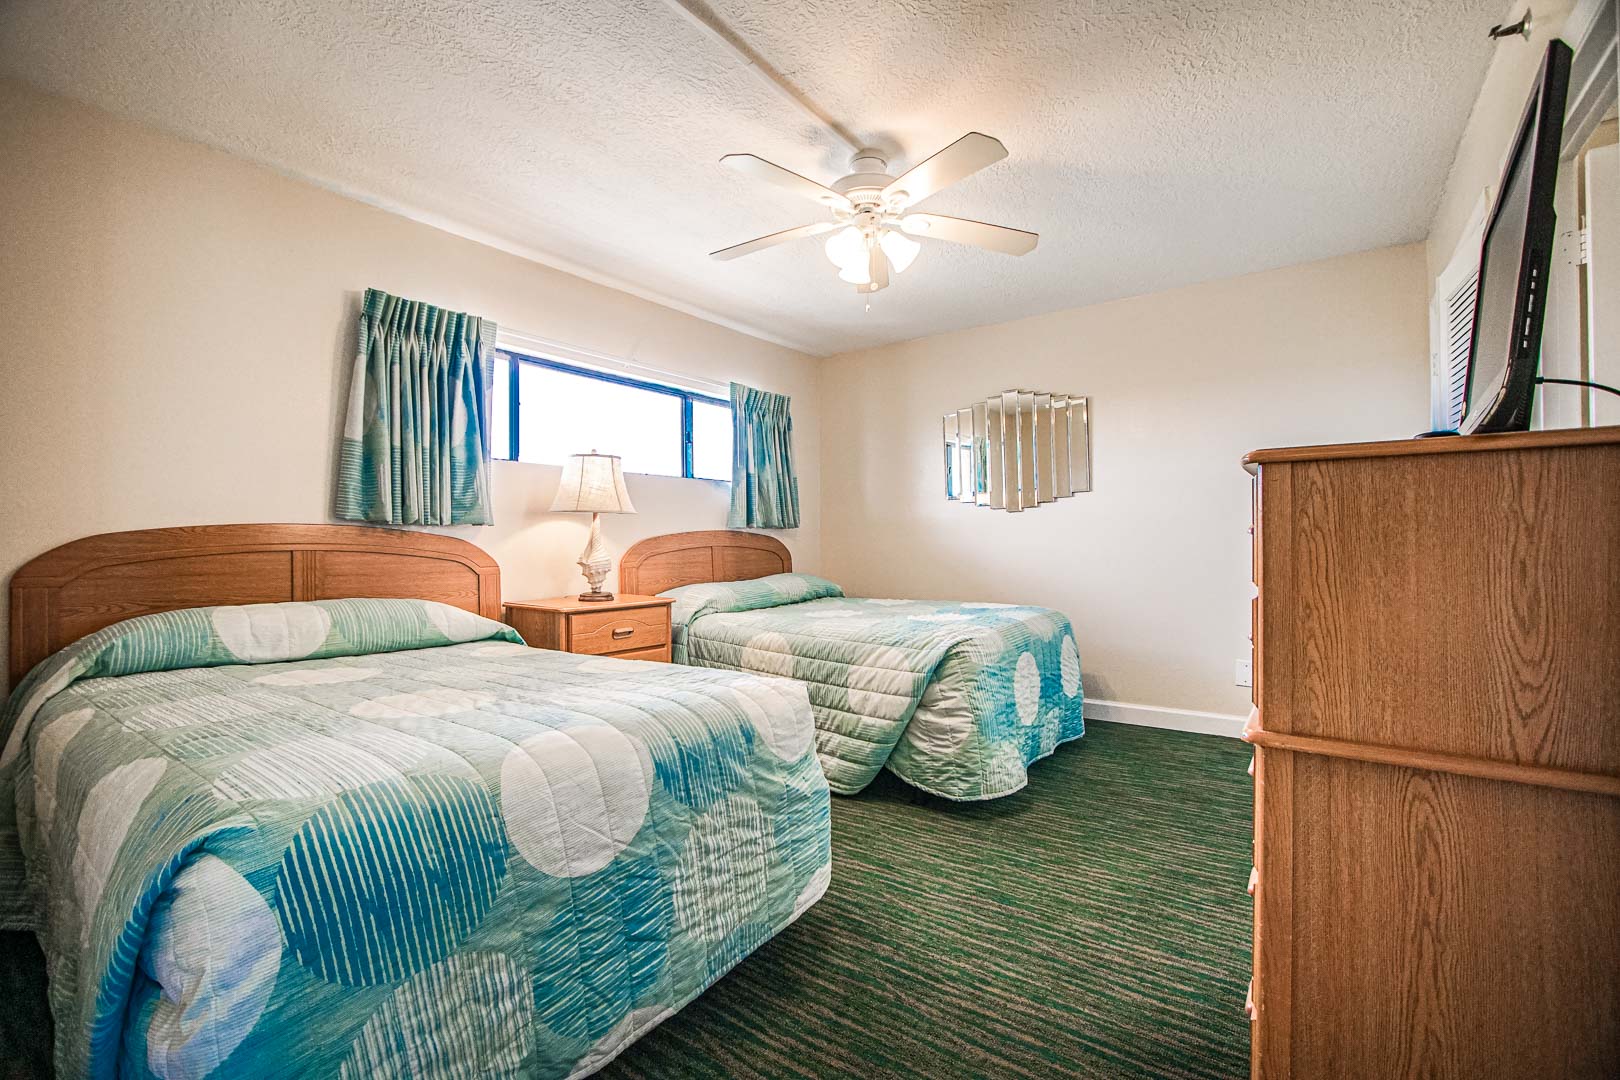 A bedroom with double beds at VRI's Landmark Holiday Beach Resort in Panama City, Florida.